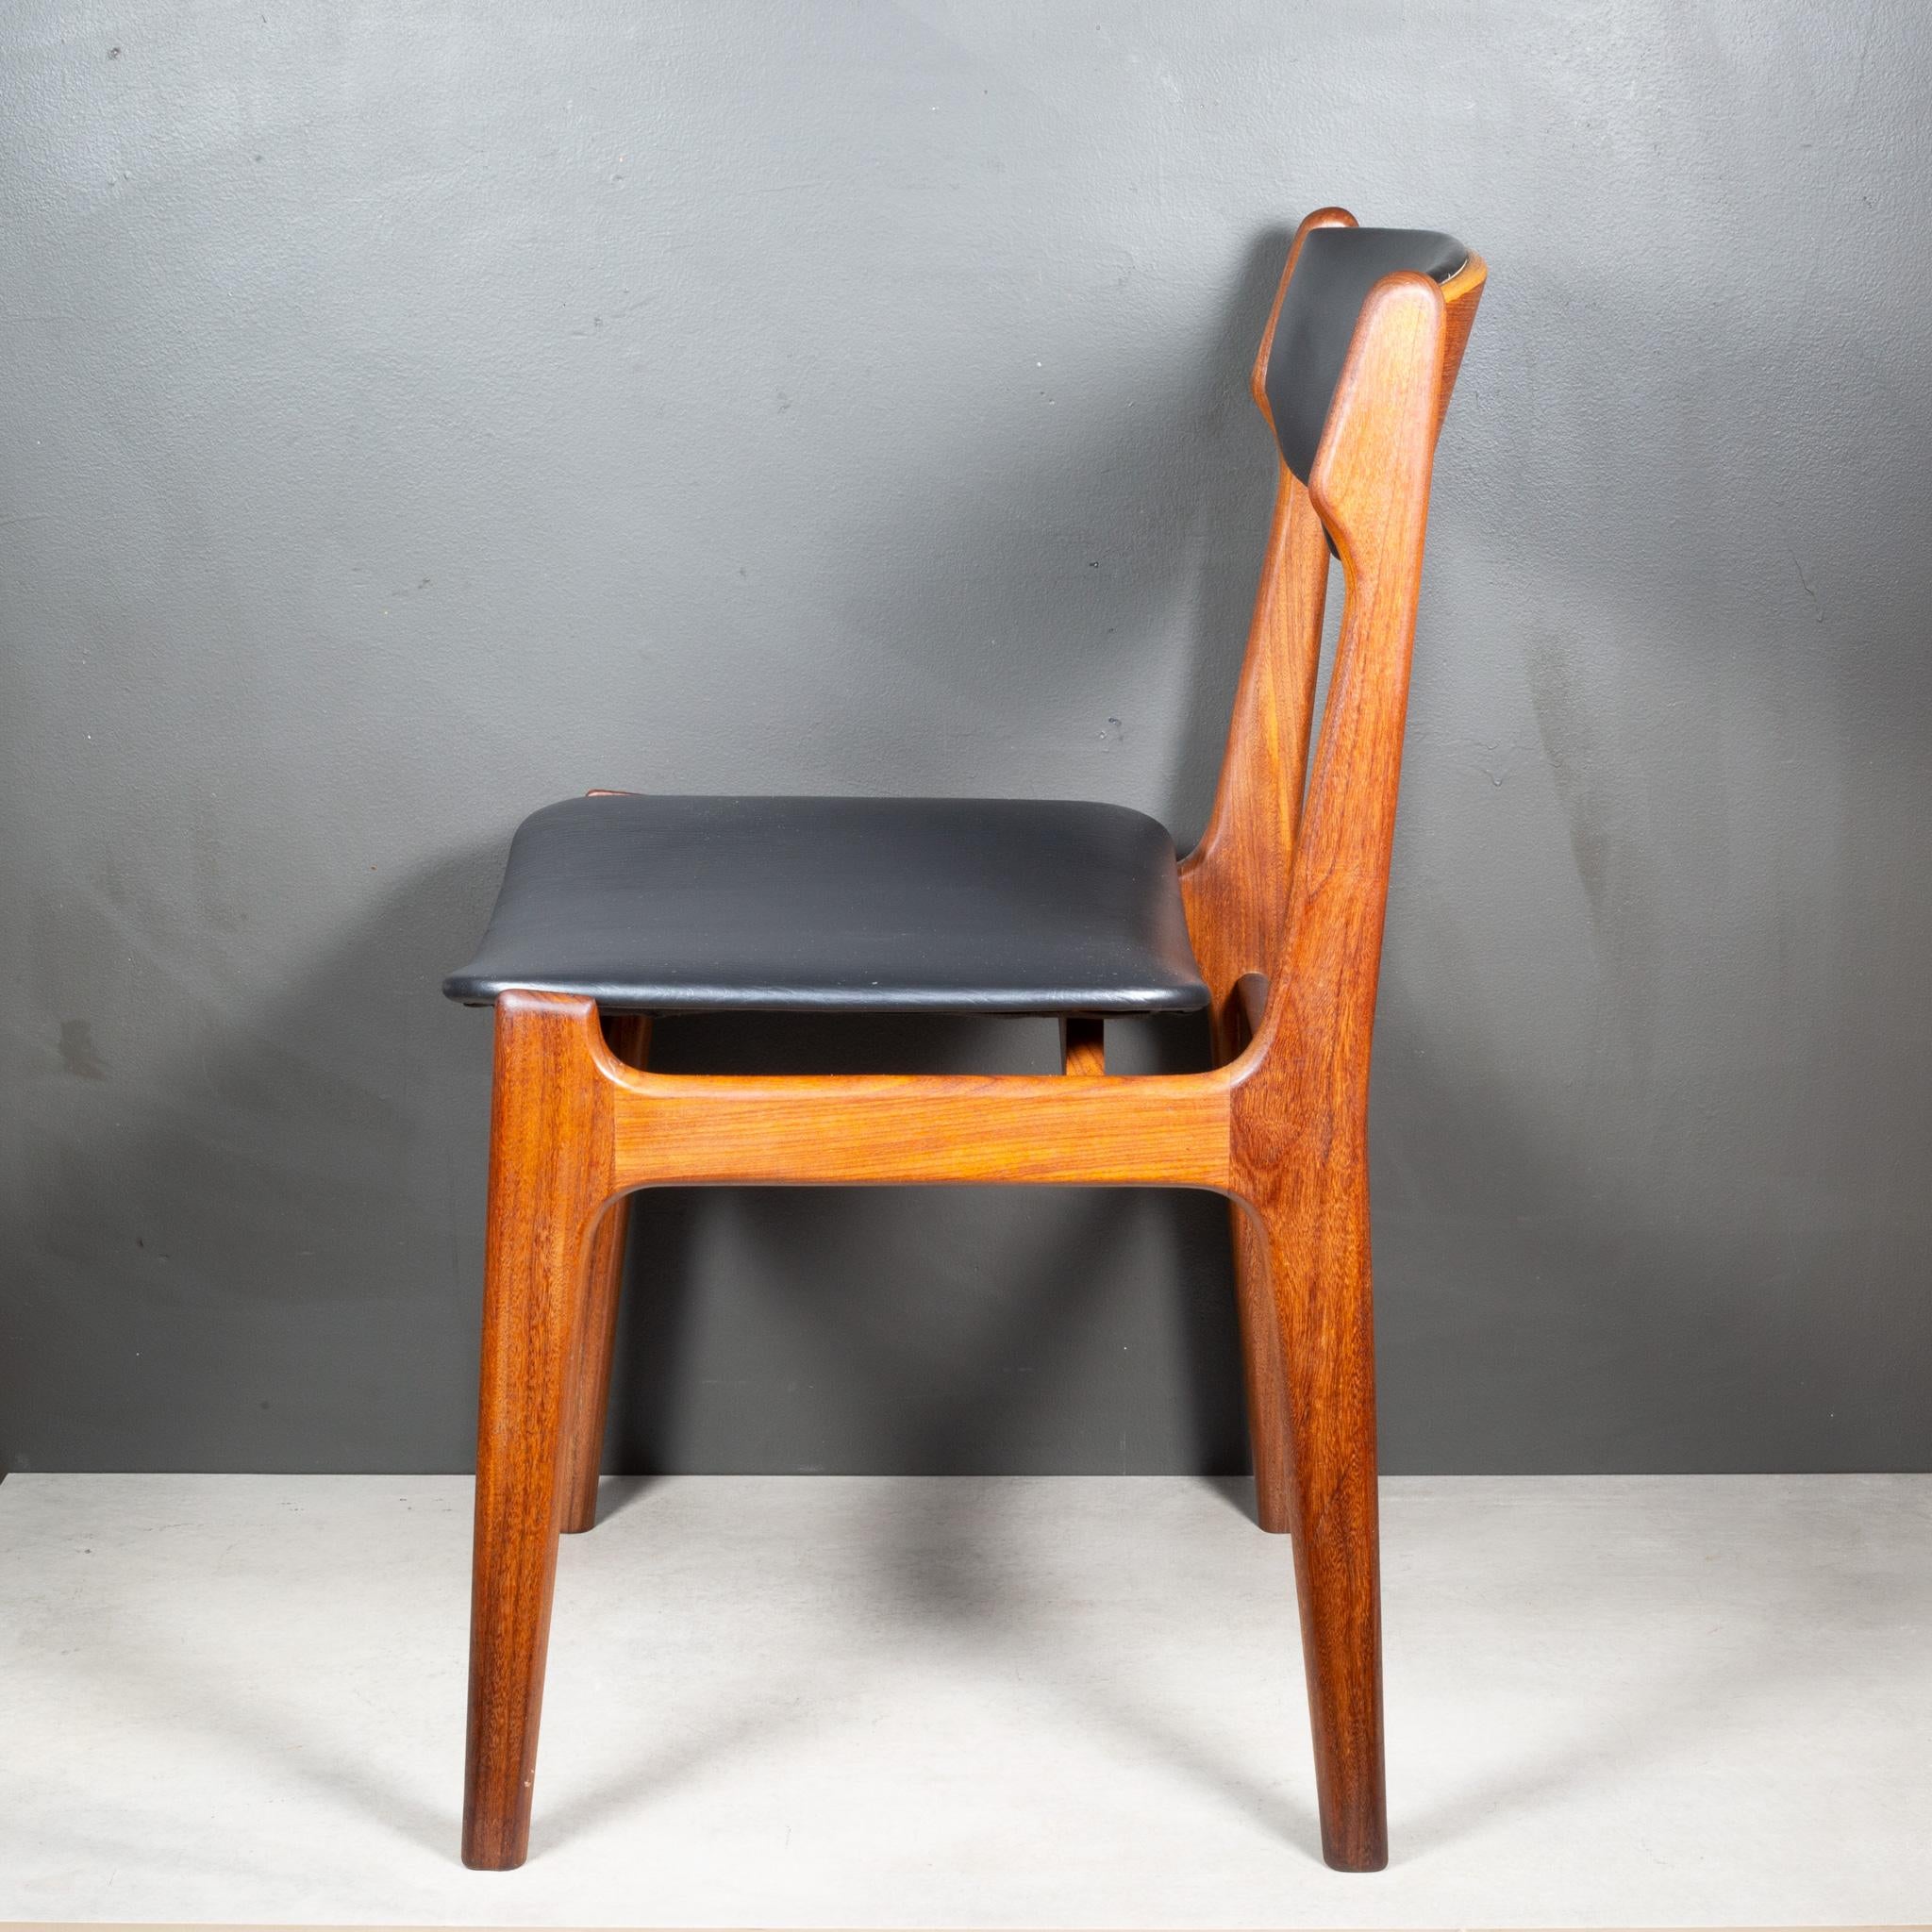  Mid-century Reupholsted Teak Dining Chairs c.1960 For Sale 1